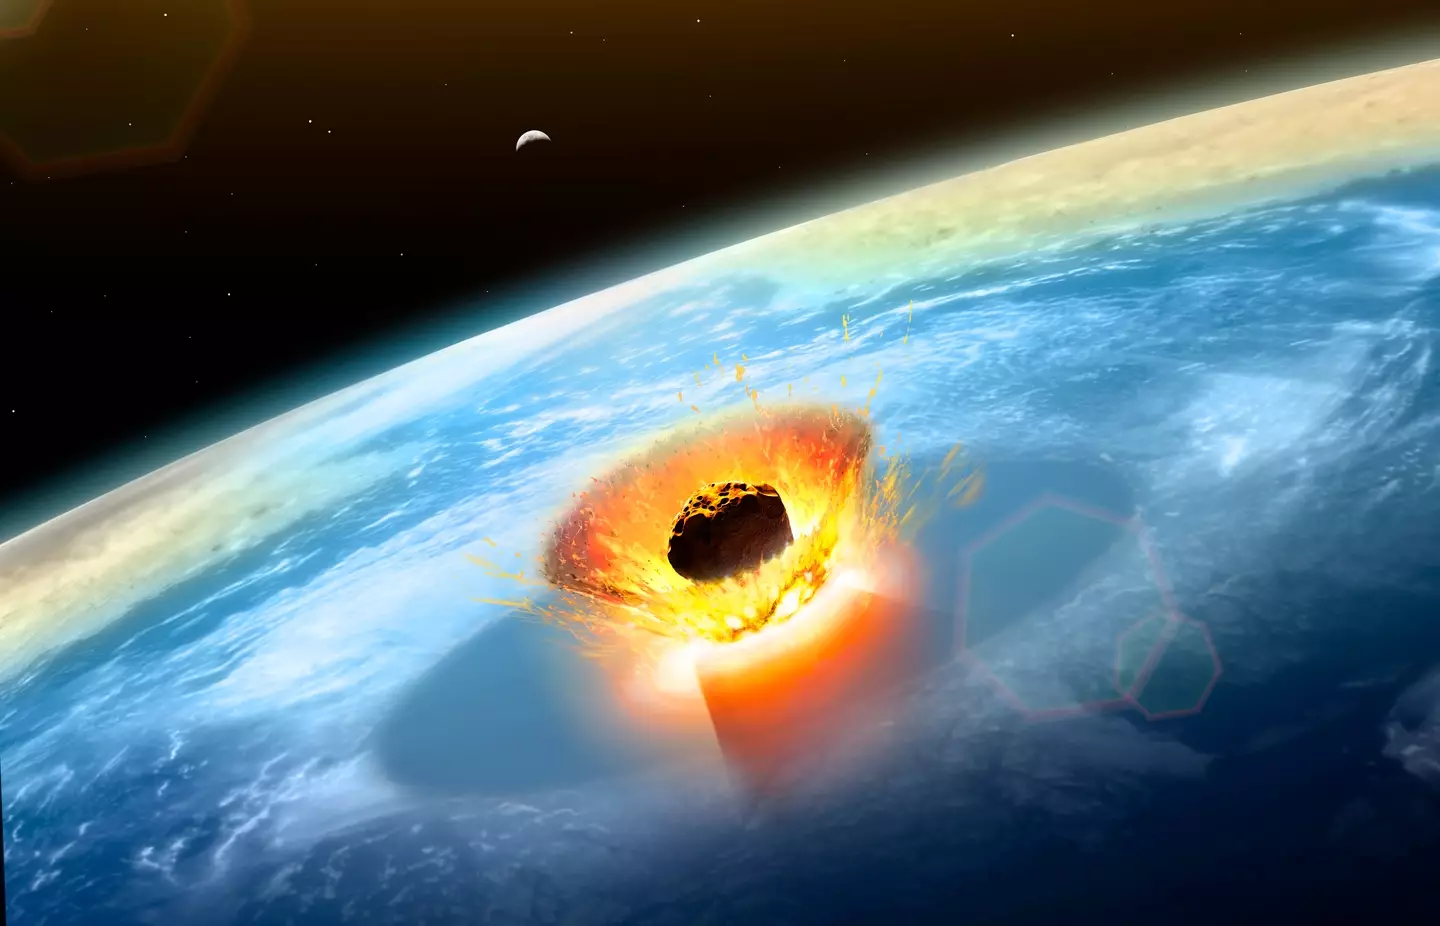 The asteroid could hit Earth next year.